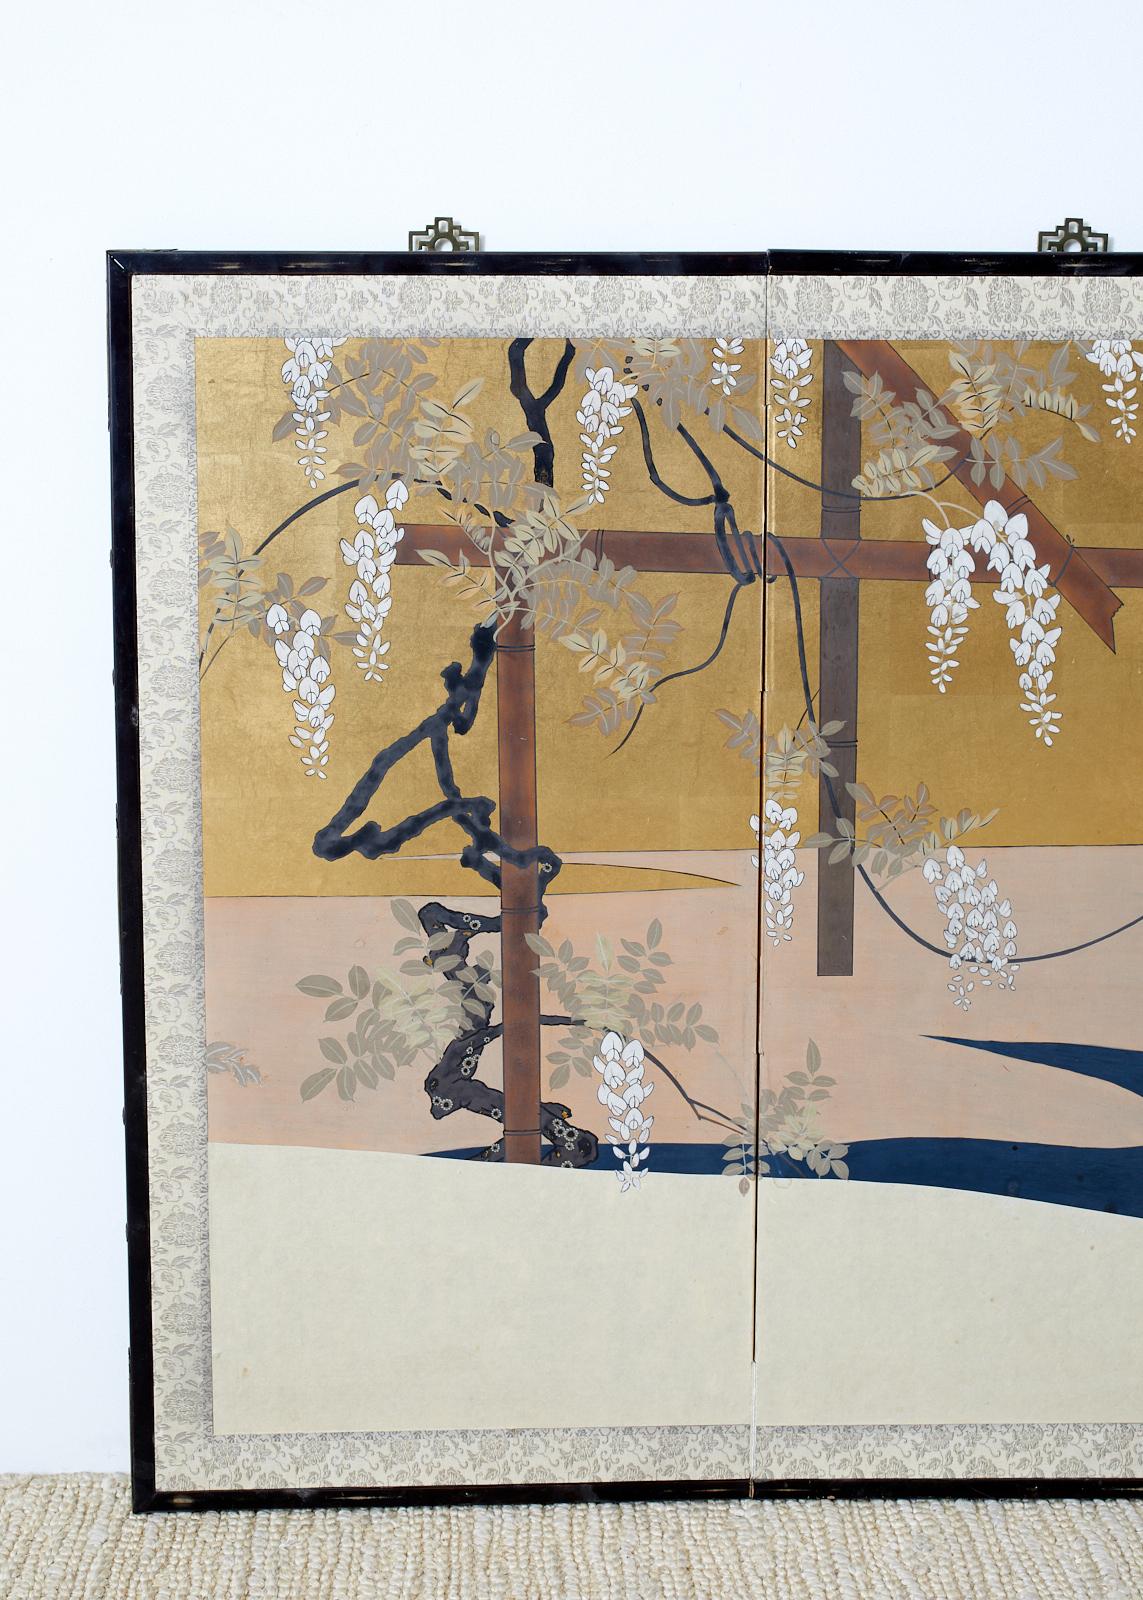 Delightful Japanese Showa period four-panel screen depicting a spring landscape with a trellis supporting wisteria and iris blooms. Beautifully crafted with large areas of gilt squares and deep indigo blue. Harmonious textures and colors that must